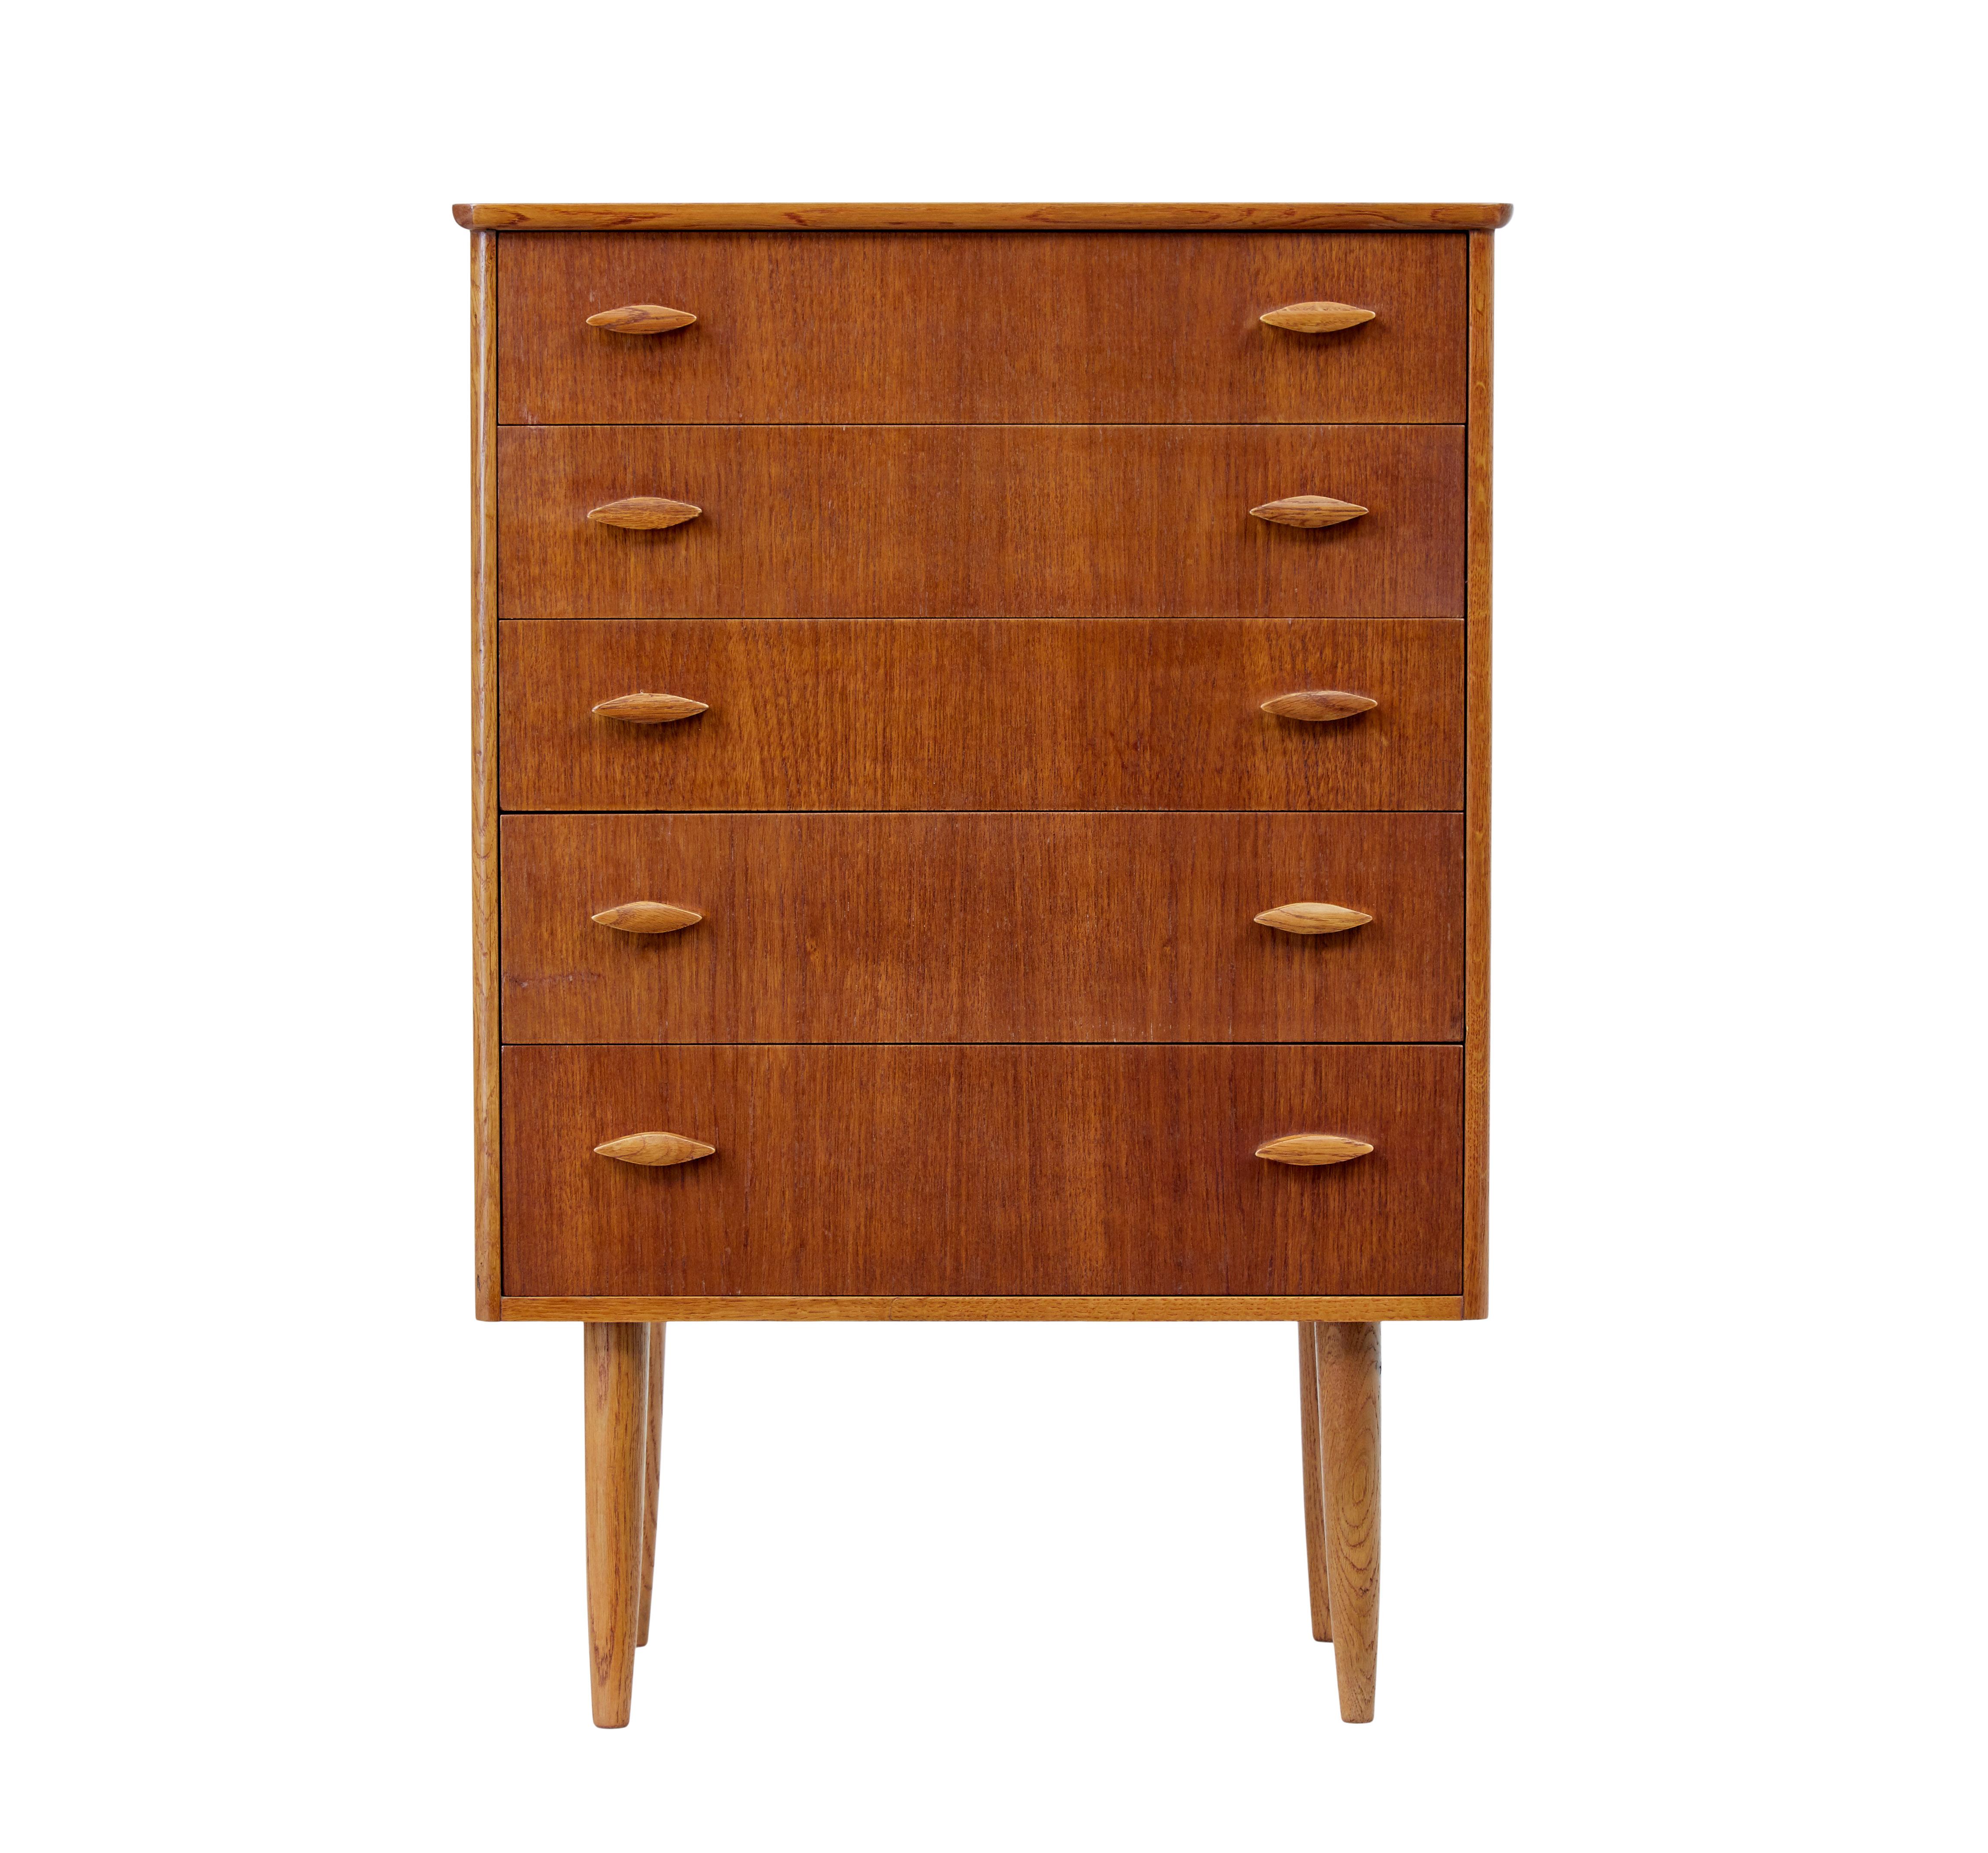 Danish midcentury teak chest of drawers circa 1960.

Good quality midcentury chest from Denmark of small proportions, which lends itself for many use's around the home.

Made in teak and fitted with 5 slightly graduating drawers, each fitted